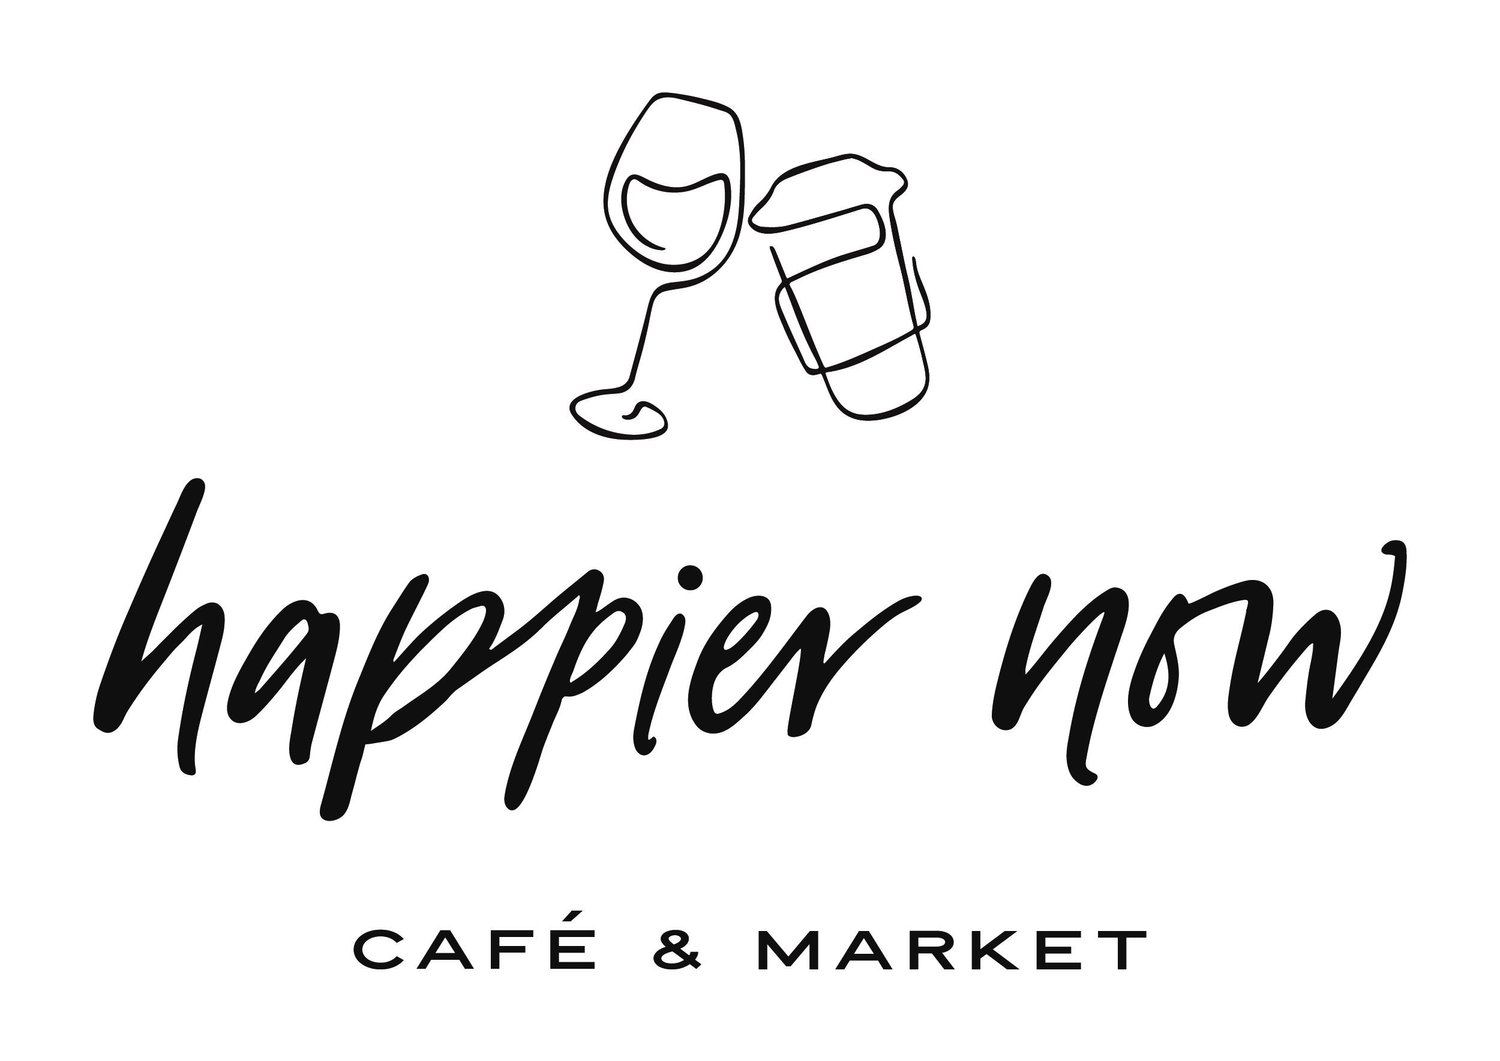 Happier Now Market and Cafe